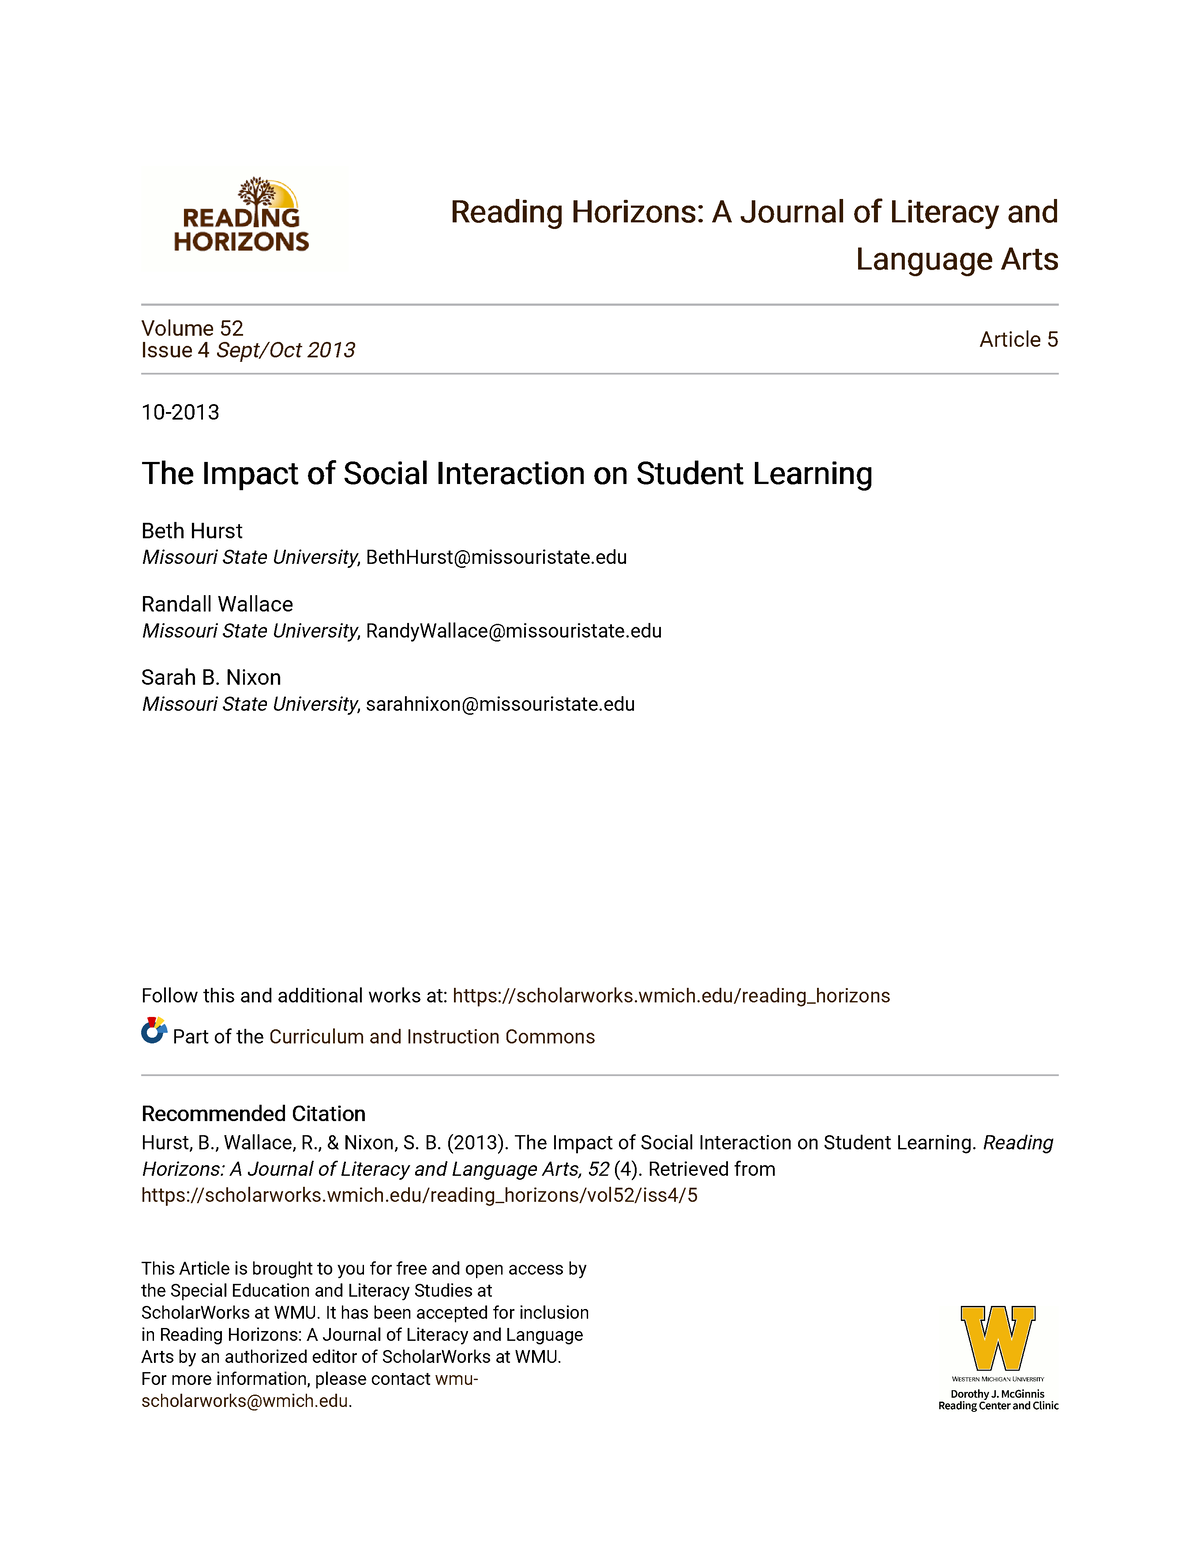 impact of social interaction on student learning research paper